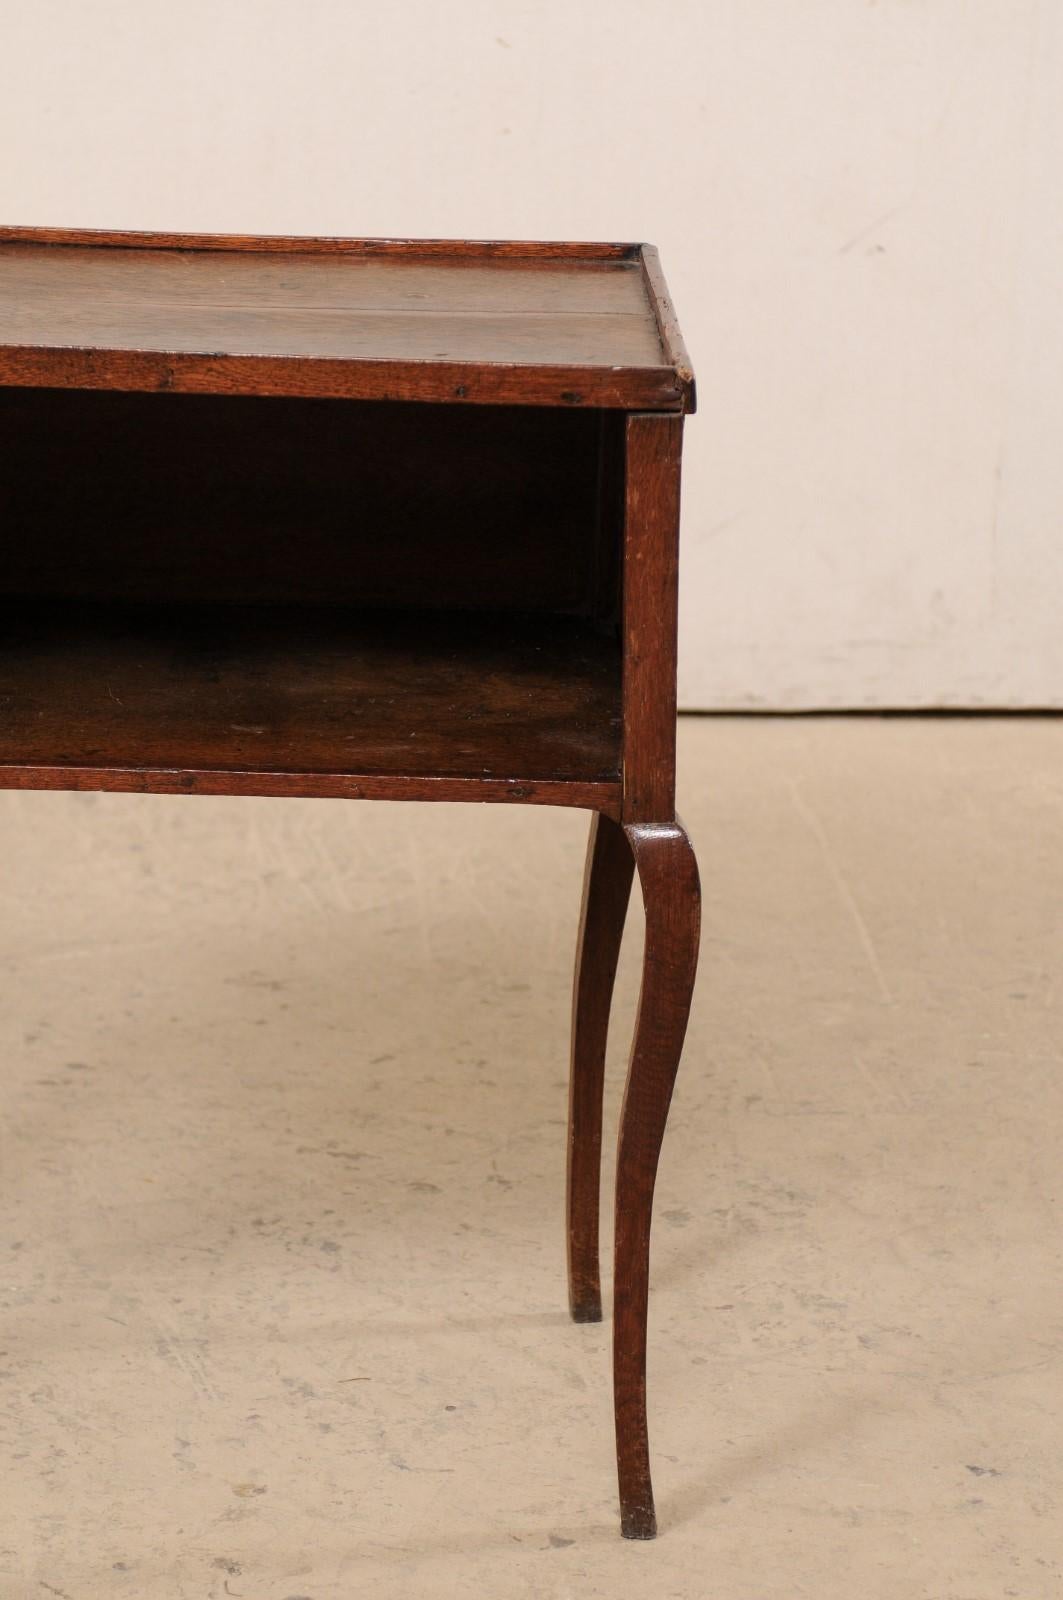 19th C. French Side Table with Quatrefoil Cut-Outs at Sides, Lower Shelf/Cubie 6